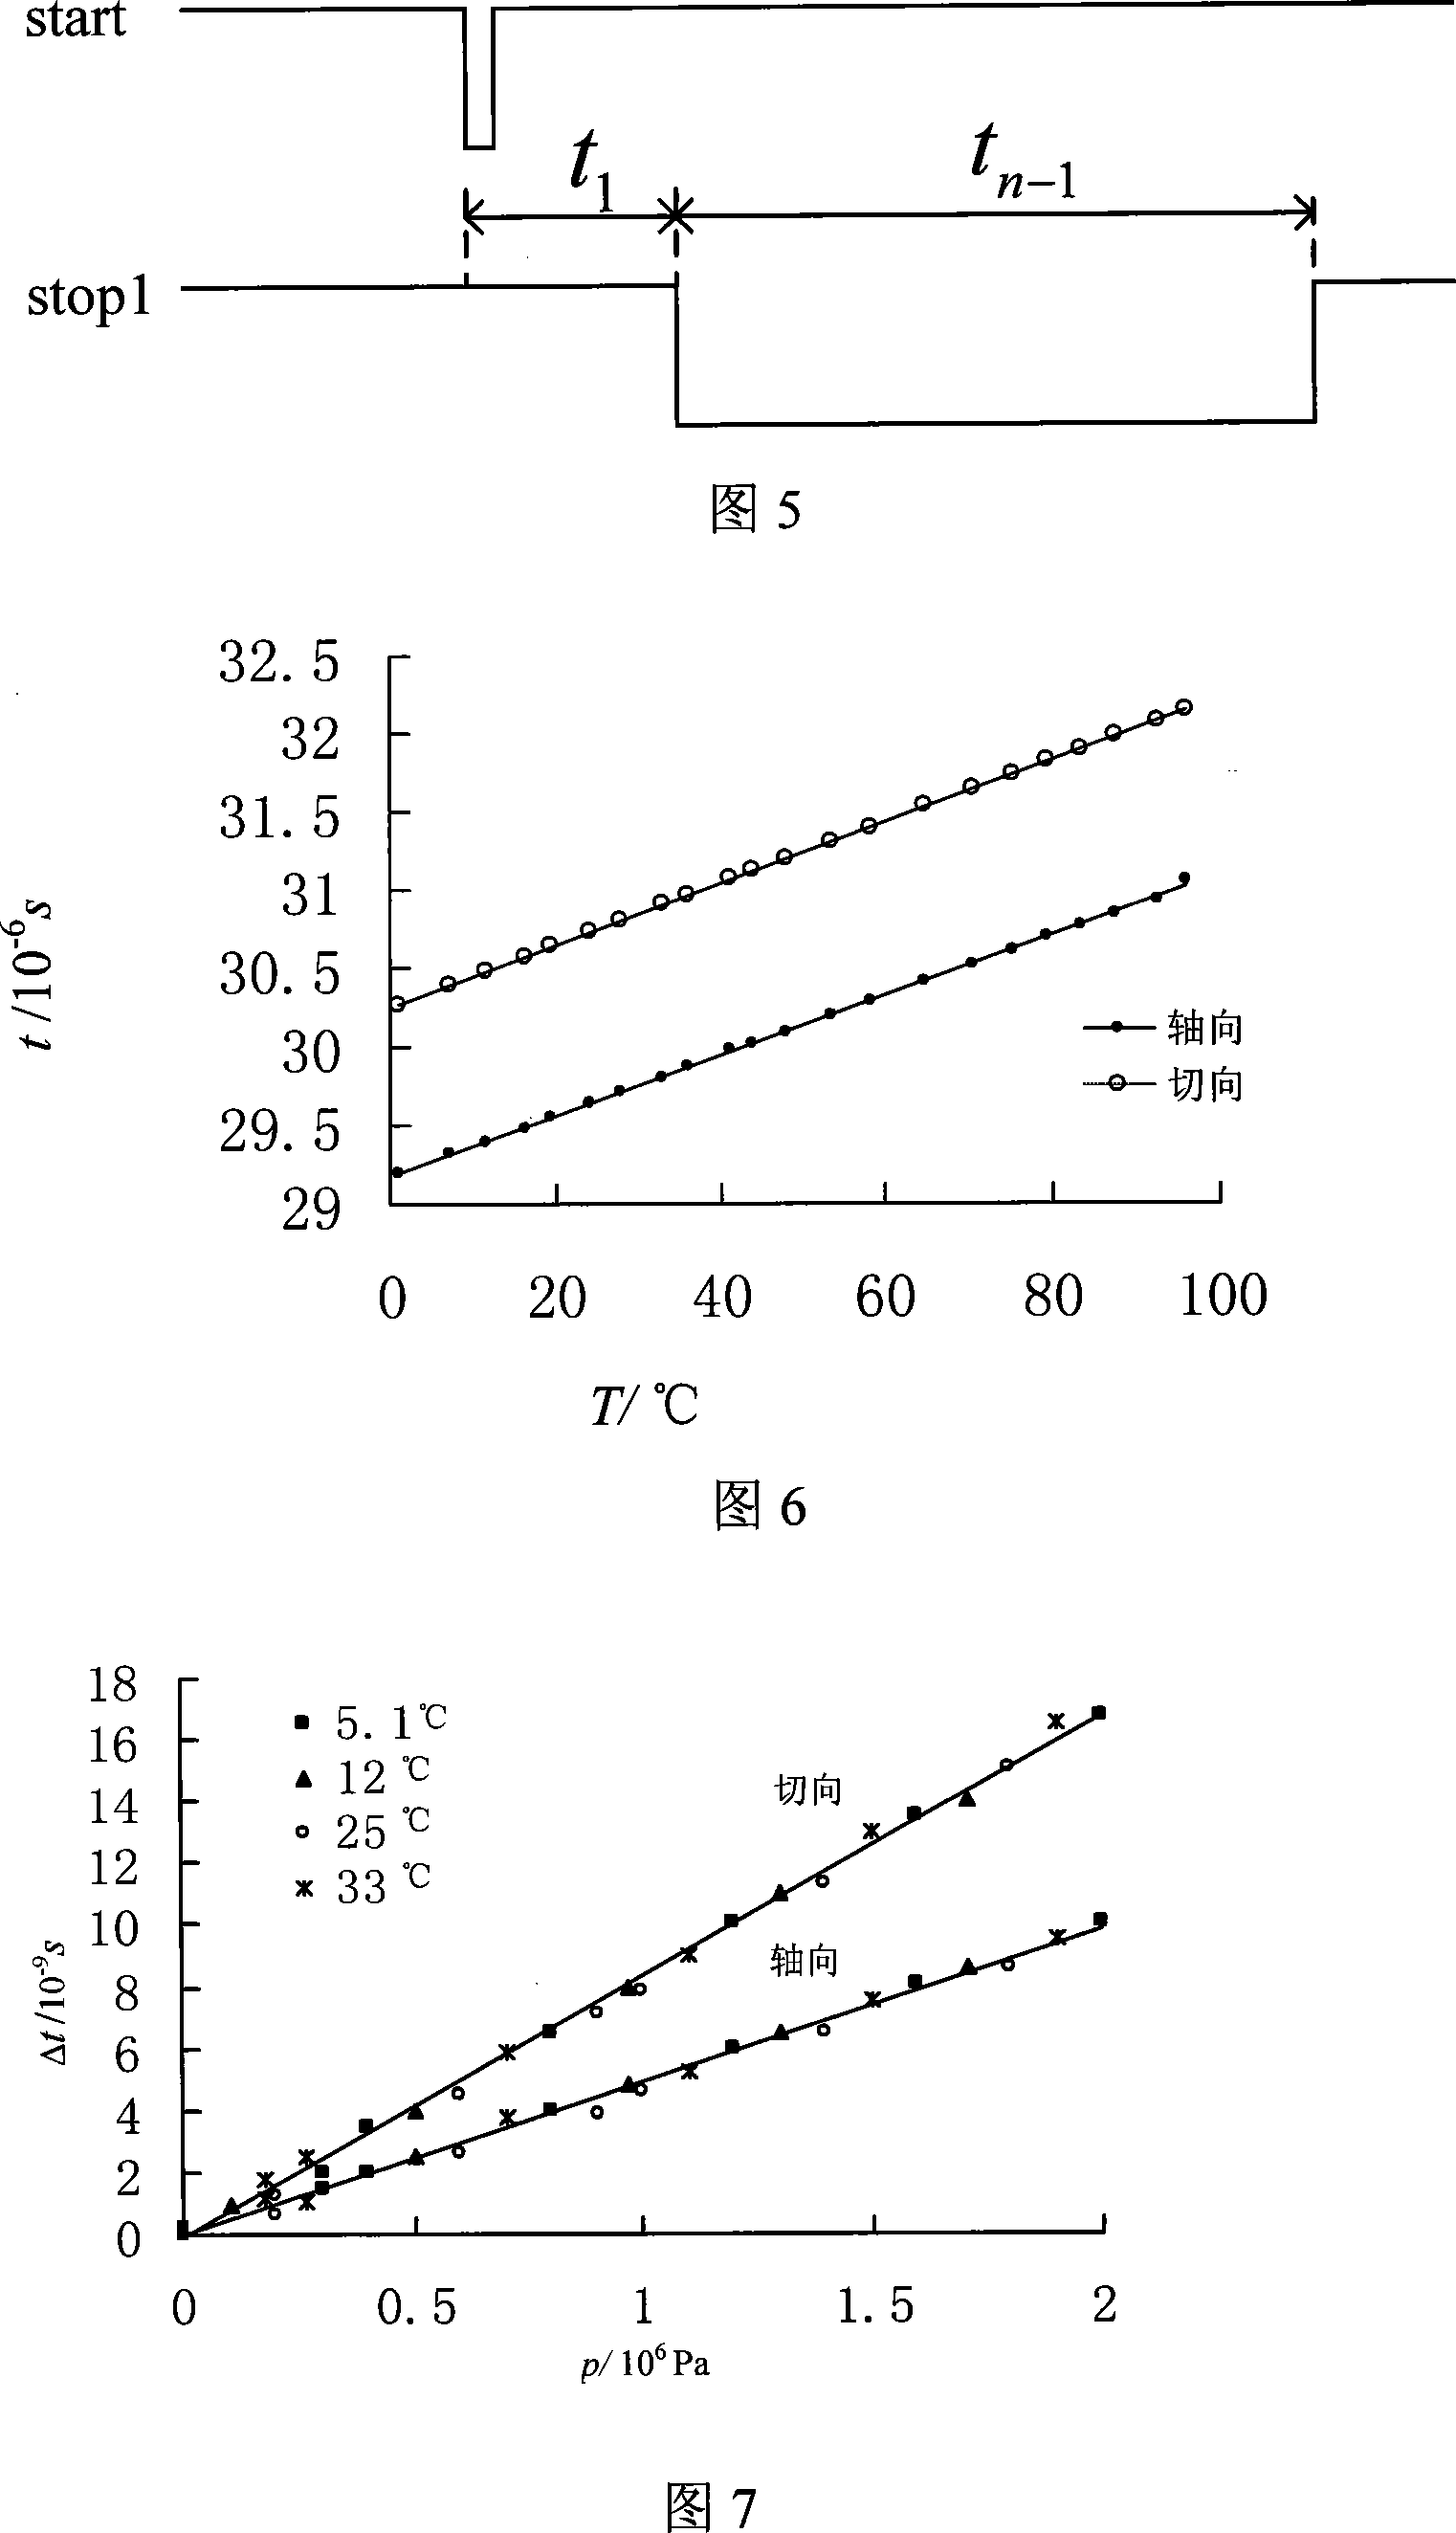 Method and device for nondestructive measuring surface temperature and pressure of cylindrical pressure vessel